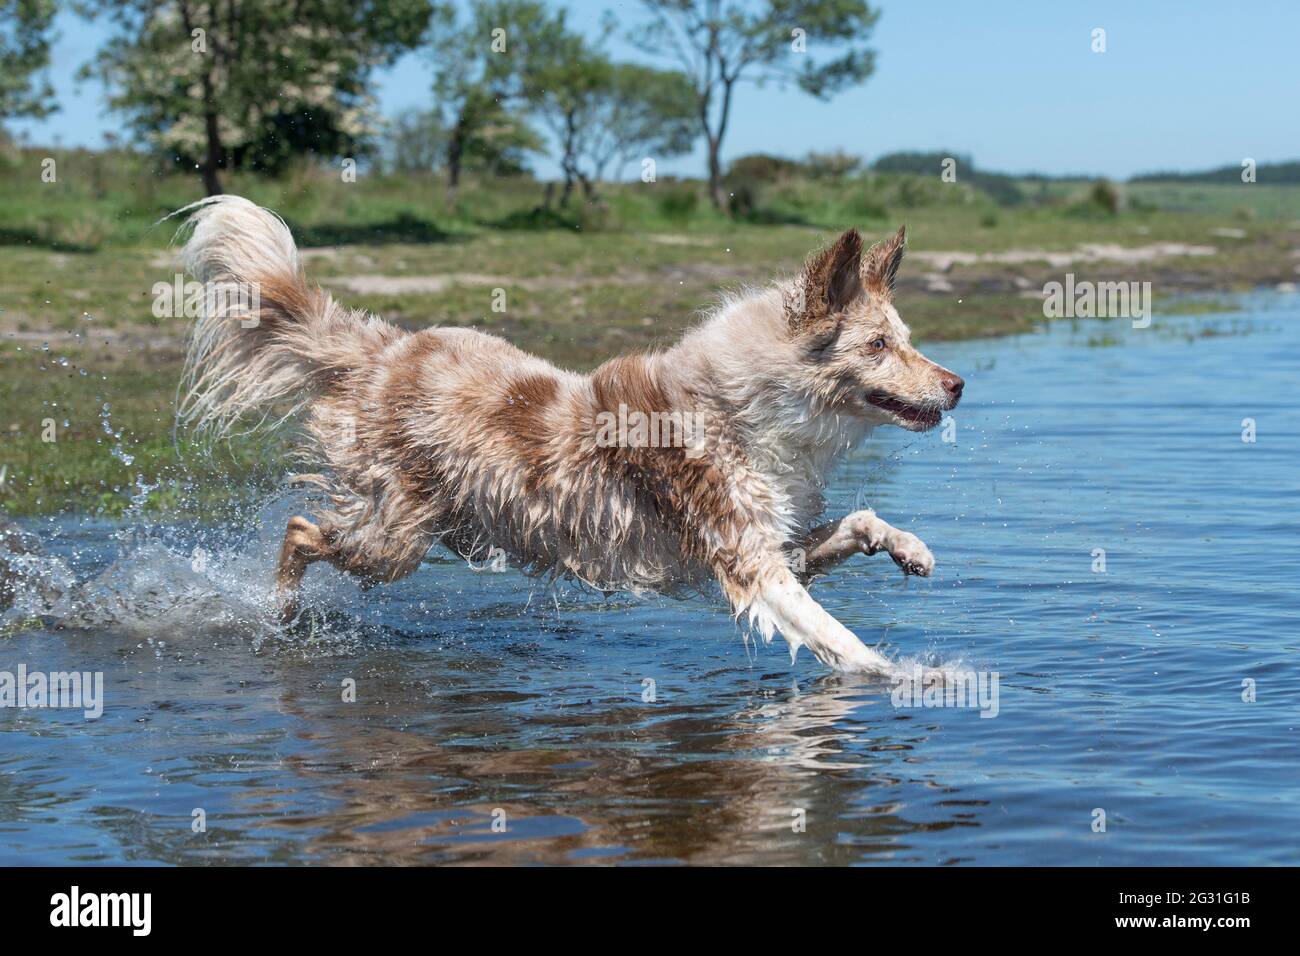 Border collie cooling off in a lake Stock Photo